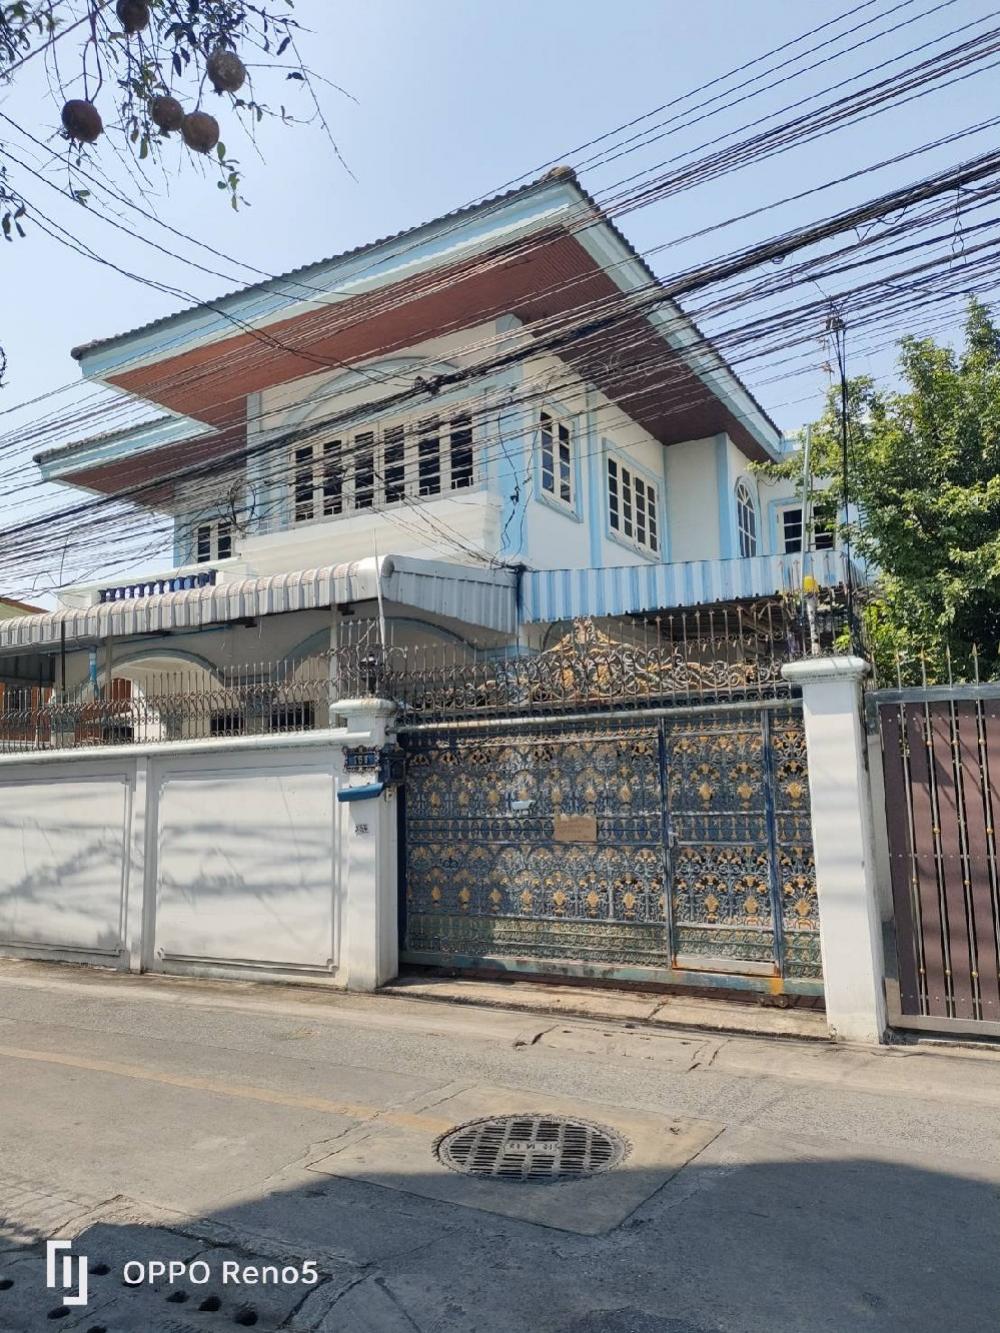 For RentHouseAri,Anusaowaree : House for rent, Saowa Phahonyothin Road, Soi 5, 2-story detached house. 3 bedrooms, 2 bathrooms, 2 air conditioners, some furniture, large hall, near Anuri Battlefield / near Chatuchak Park, near the BTS / parking in the house for 2 cars, suitable for liv